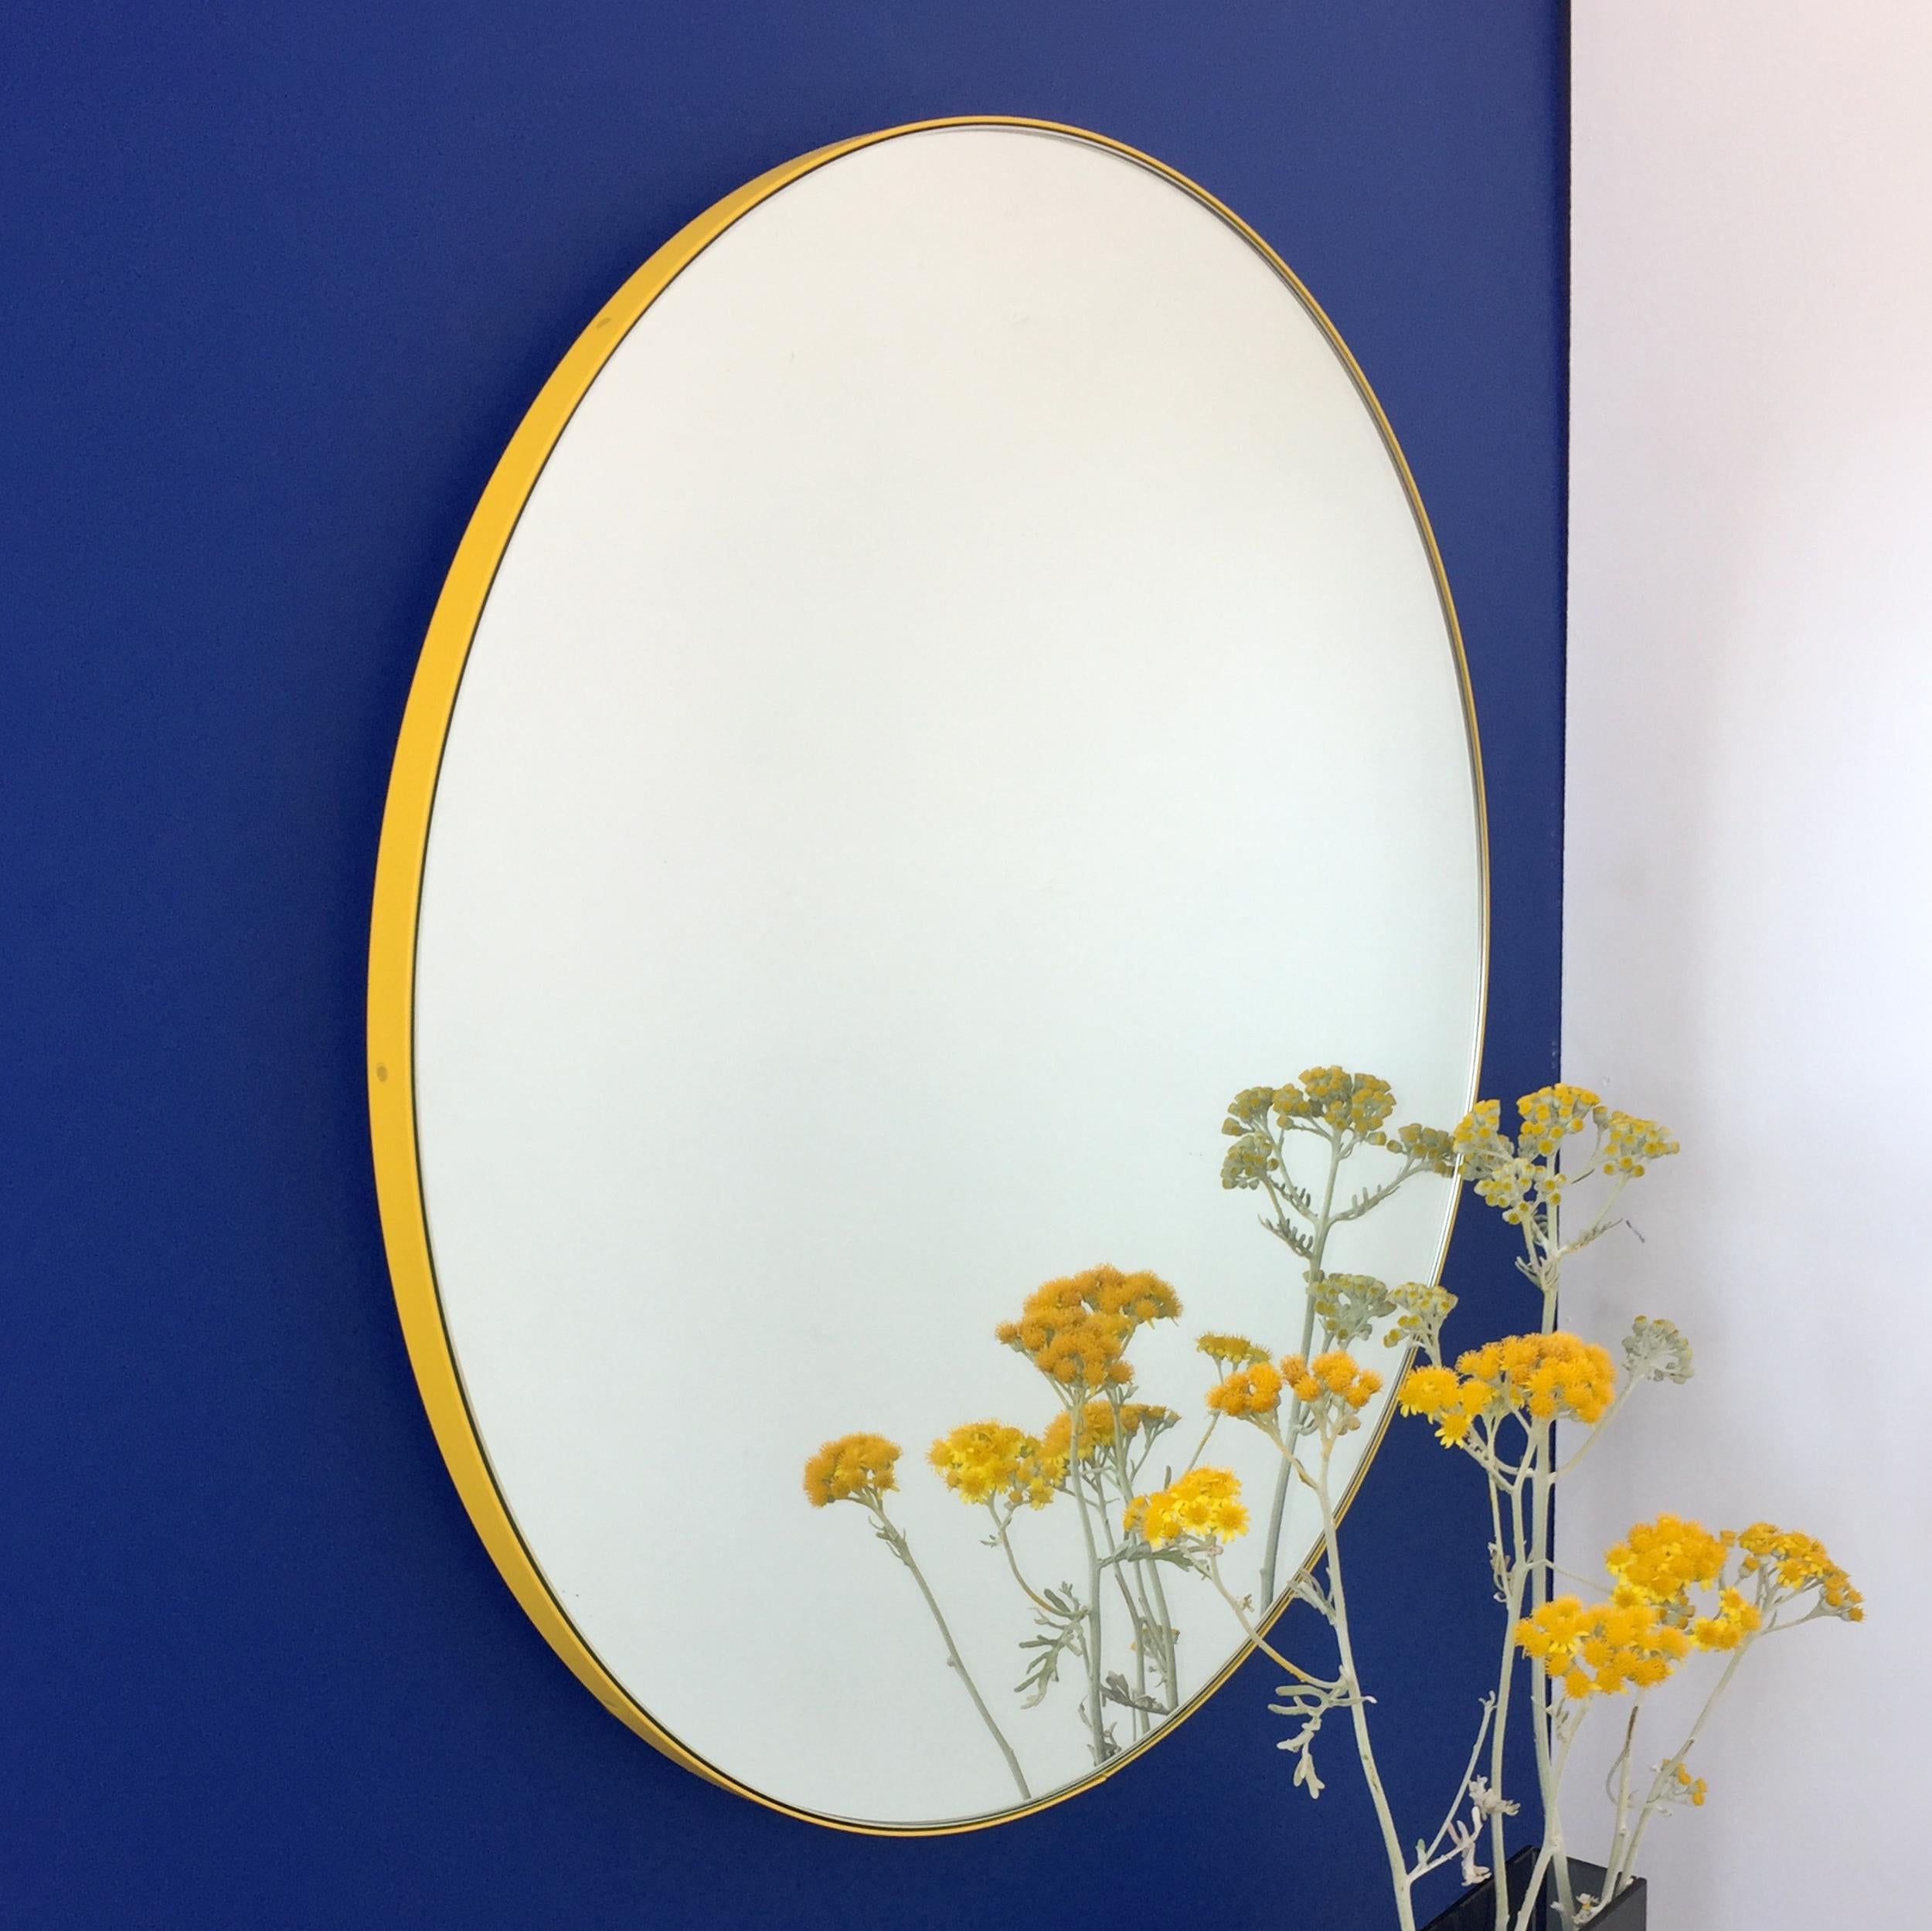 British Orbis Round Mirror with Contemporary Yellow Frame, Regular For Sale